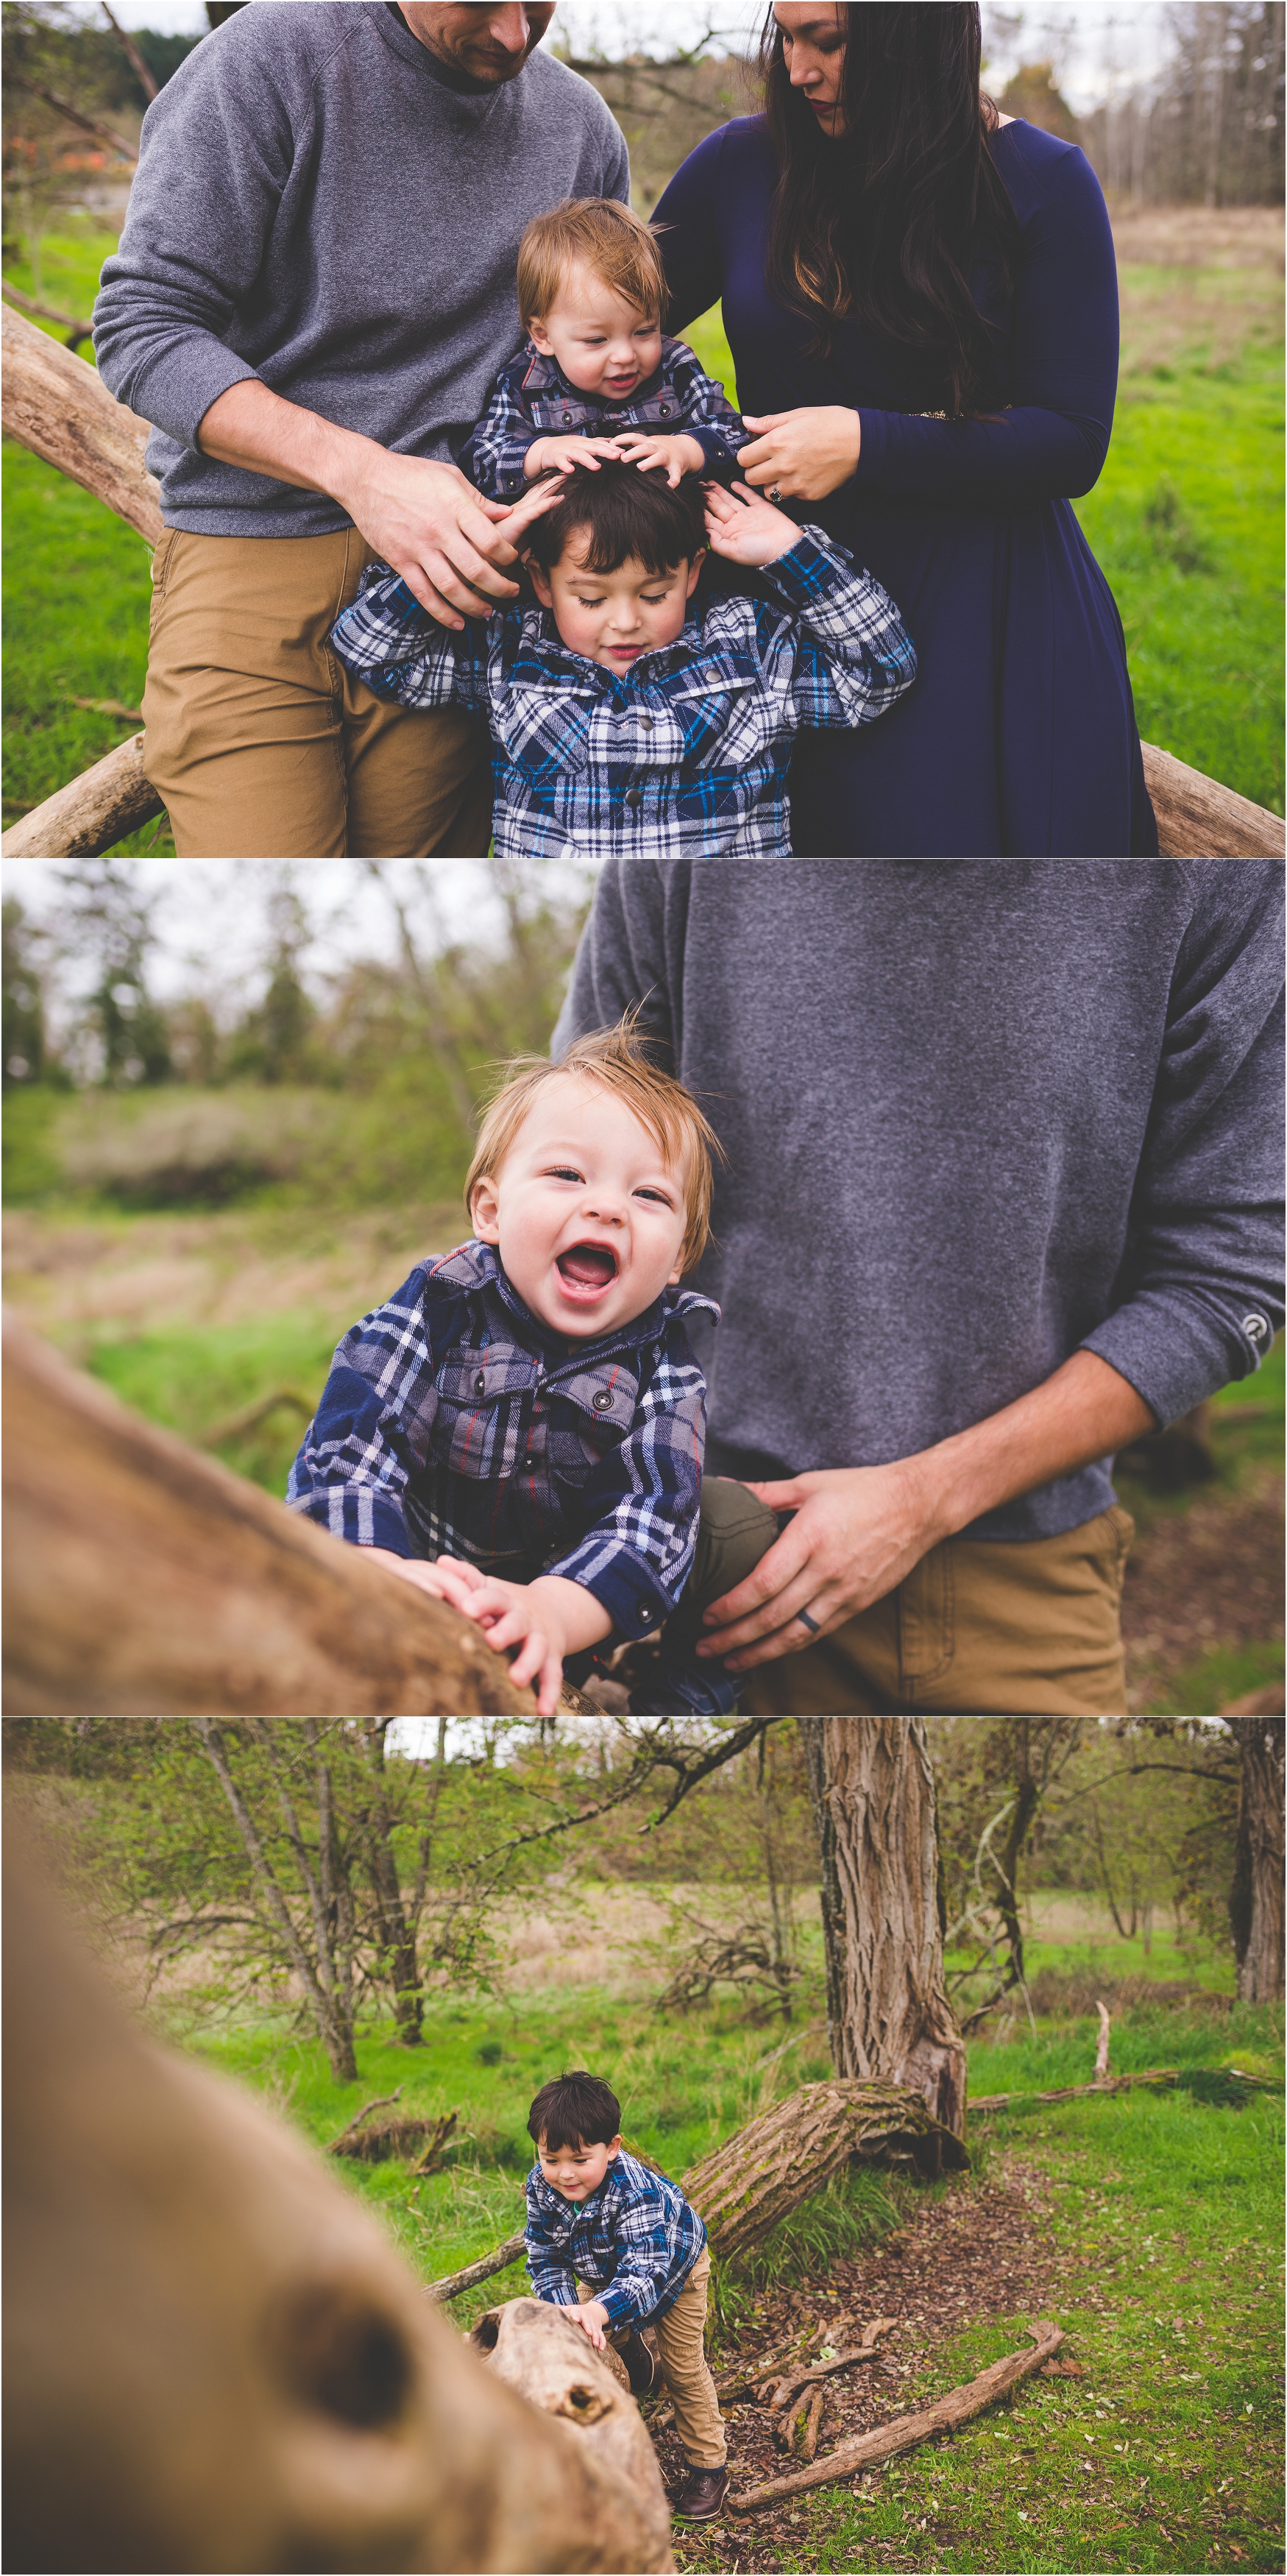 fort-steilacoom-park-family-session-jannicka-mayte-pacific-northwest-lifestyle-photographer_0035.jpg